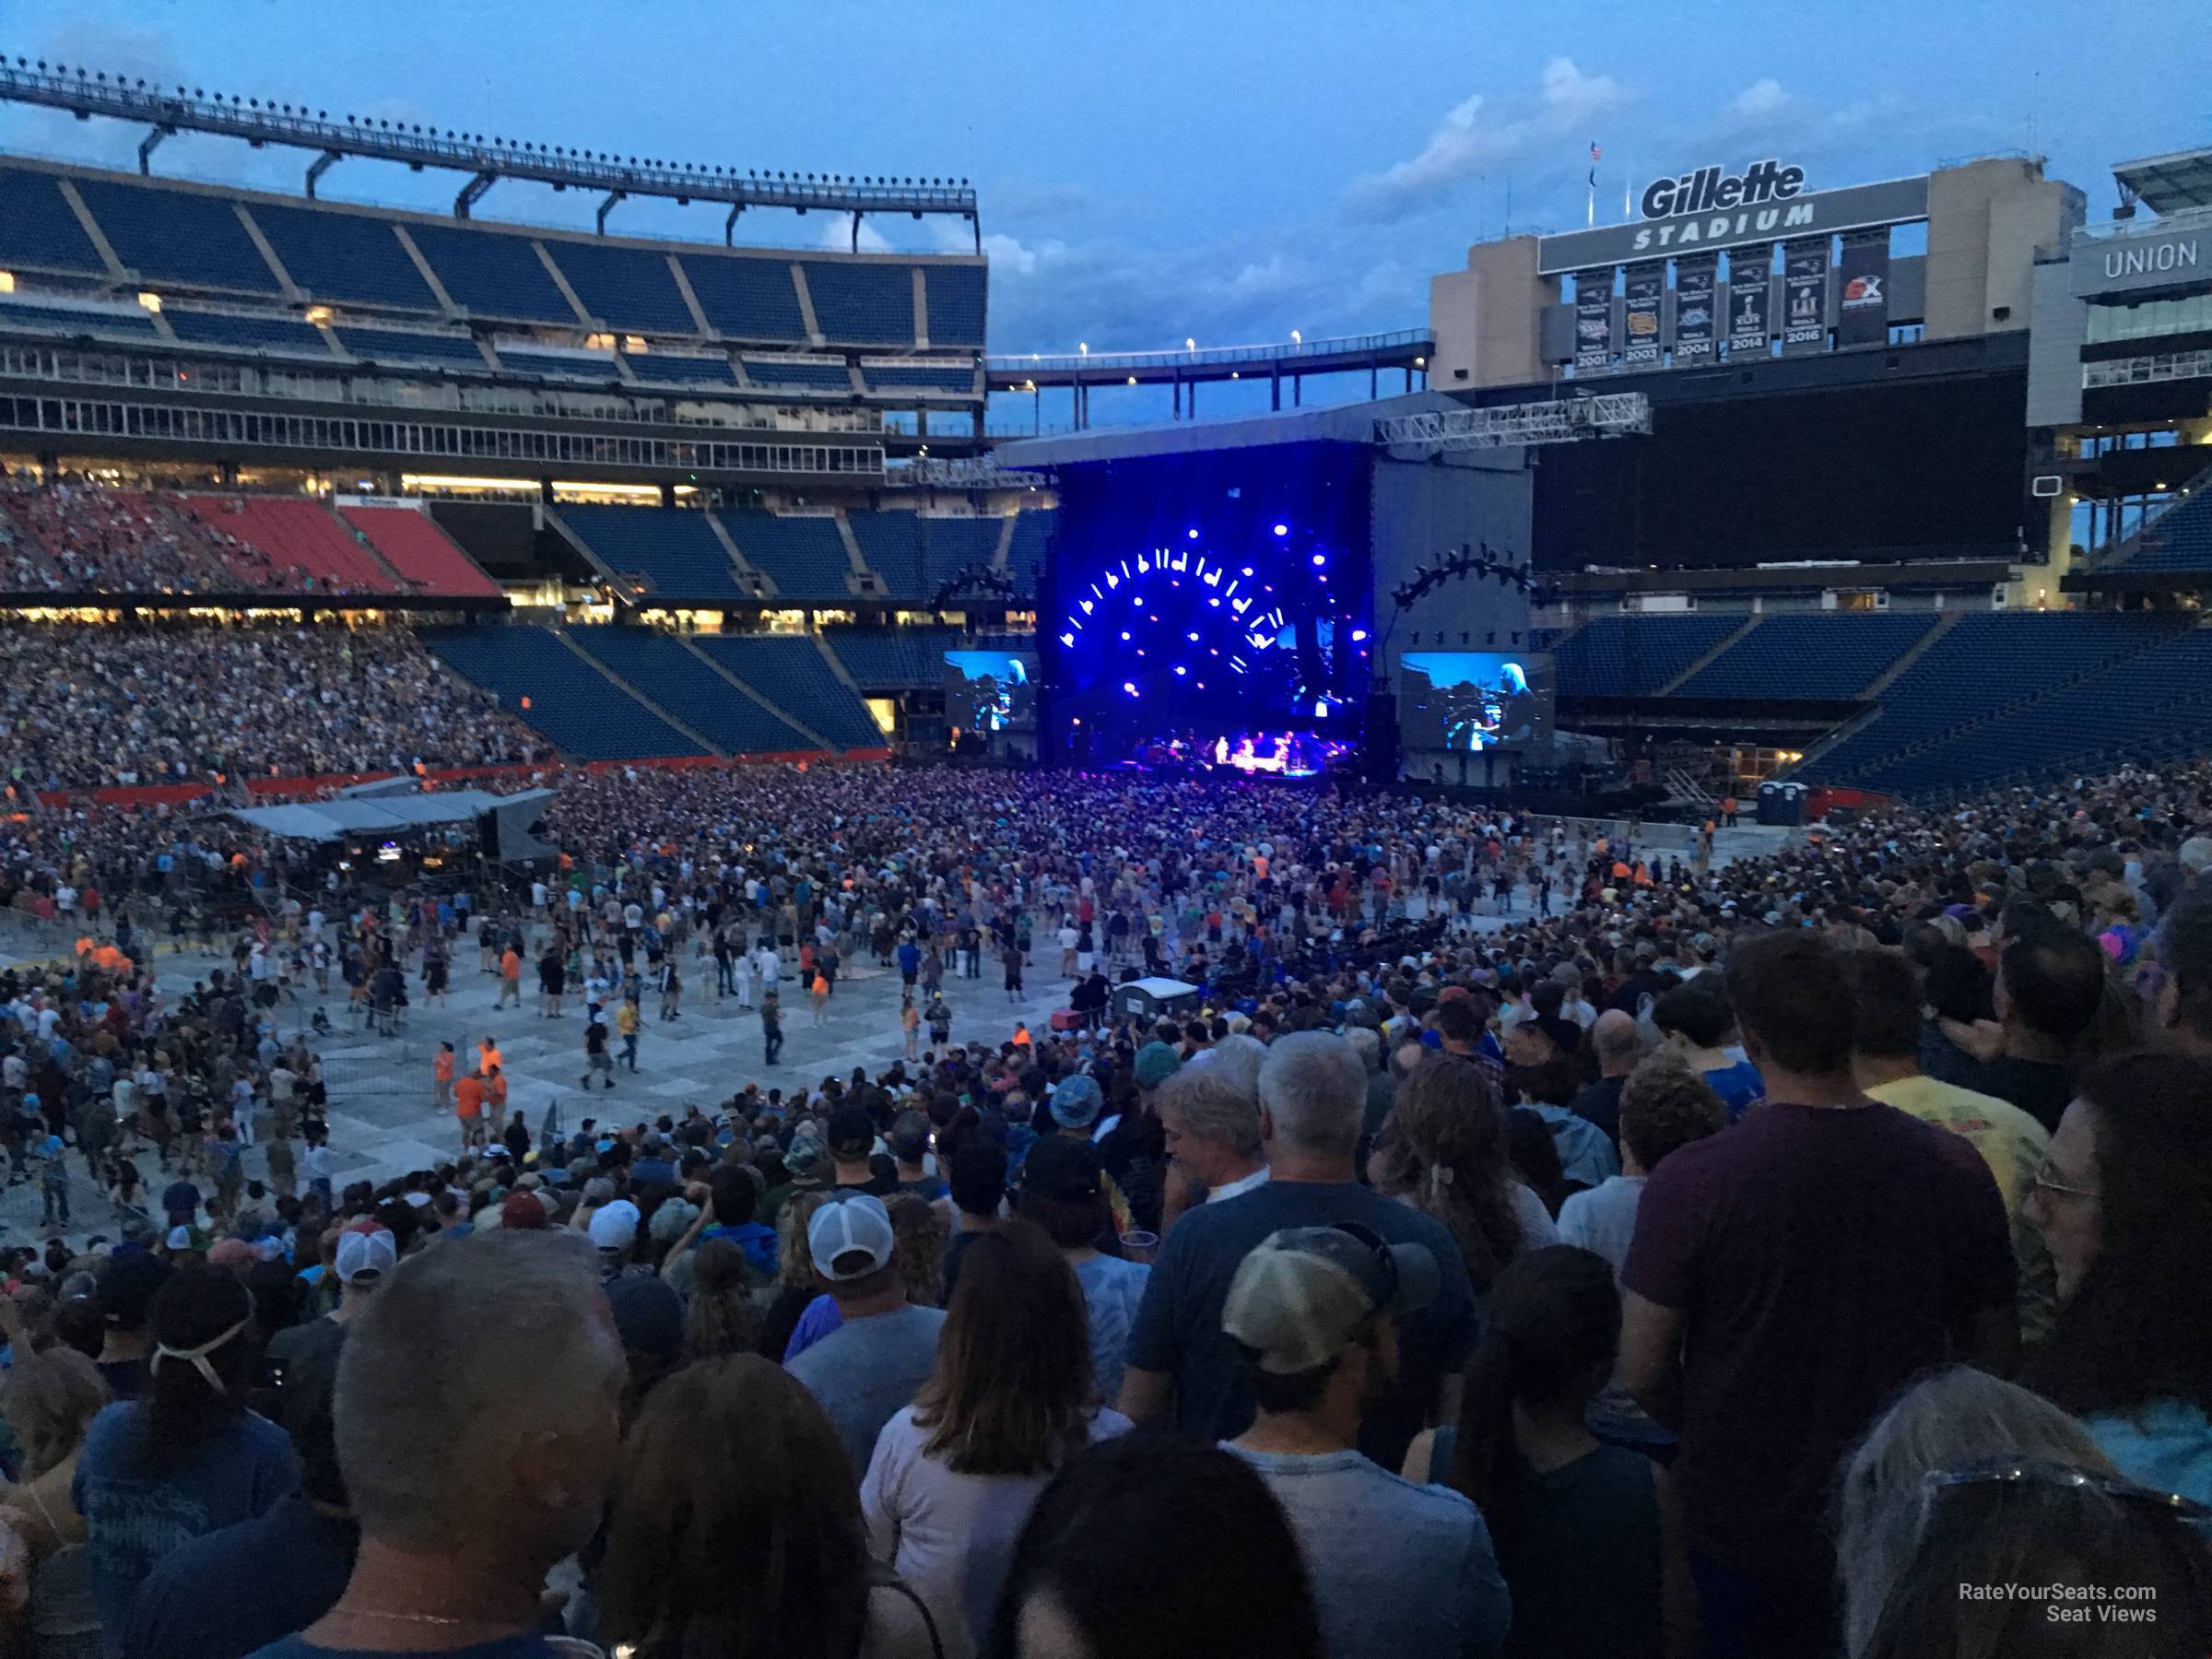 section 134, row 38 seat view  for concert - gillette stadium